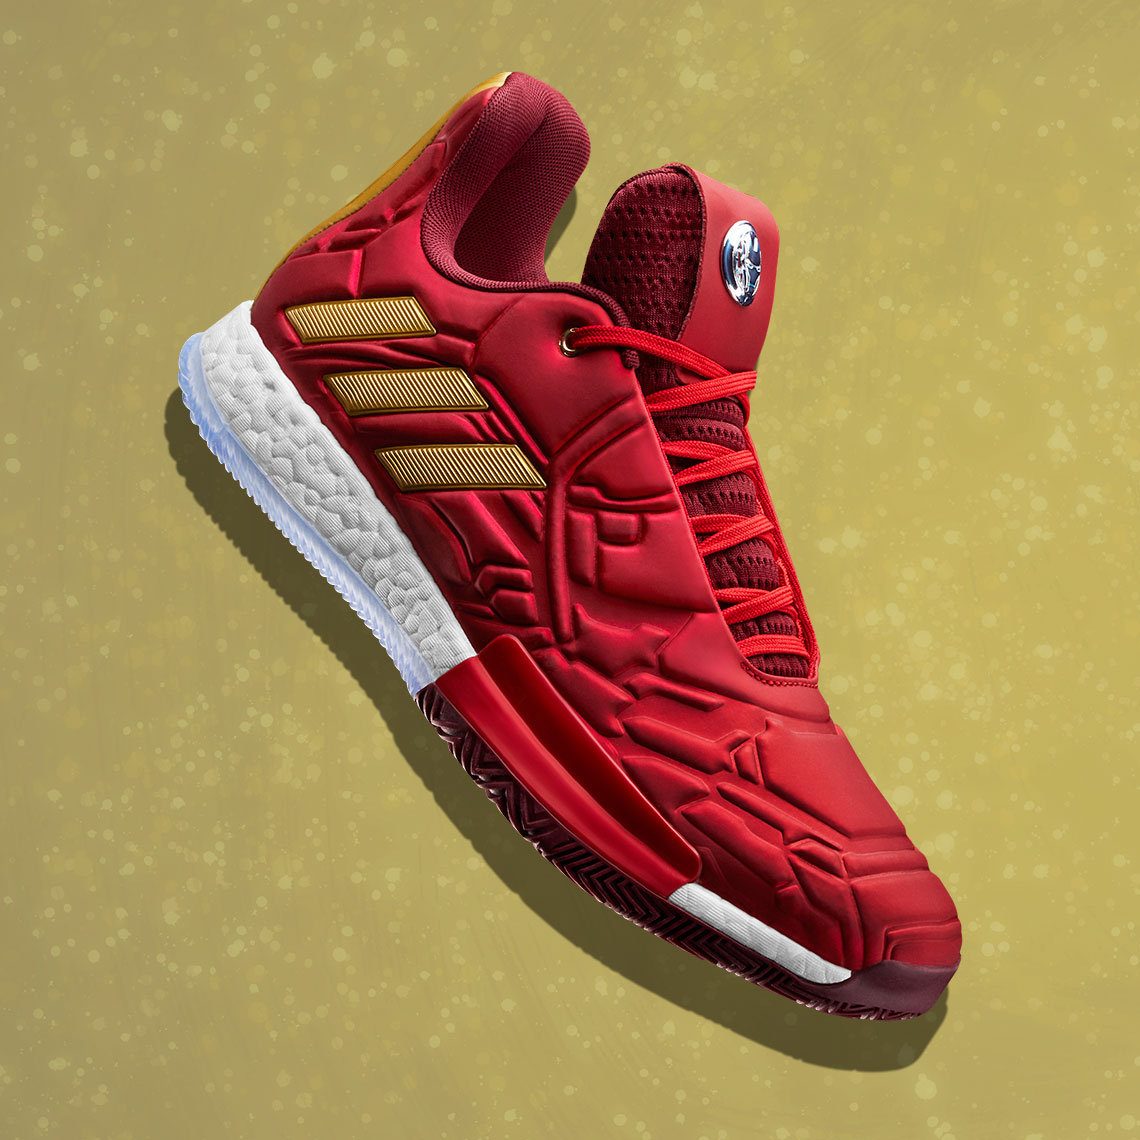 The room Bad factor Extra Marvel adidas Basketball Shoes Release Date + Info | SneakerNews.com